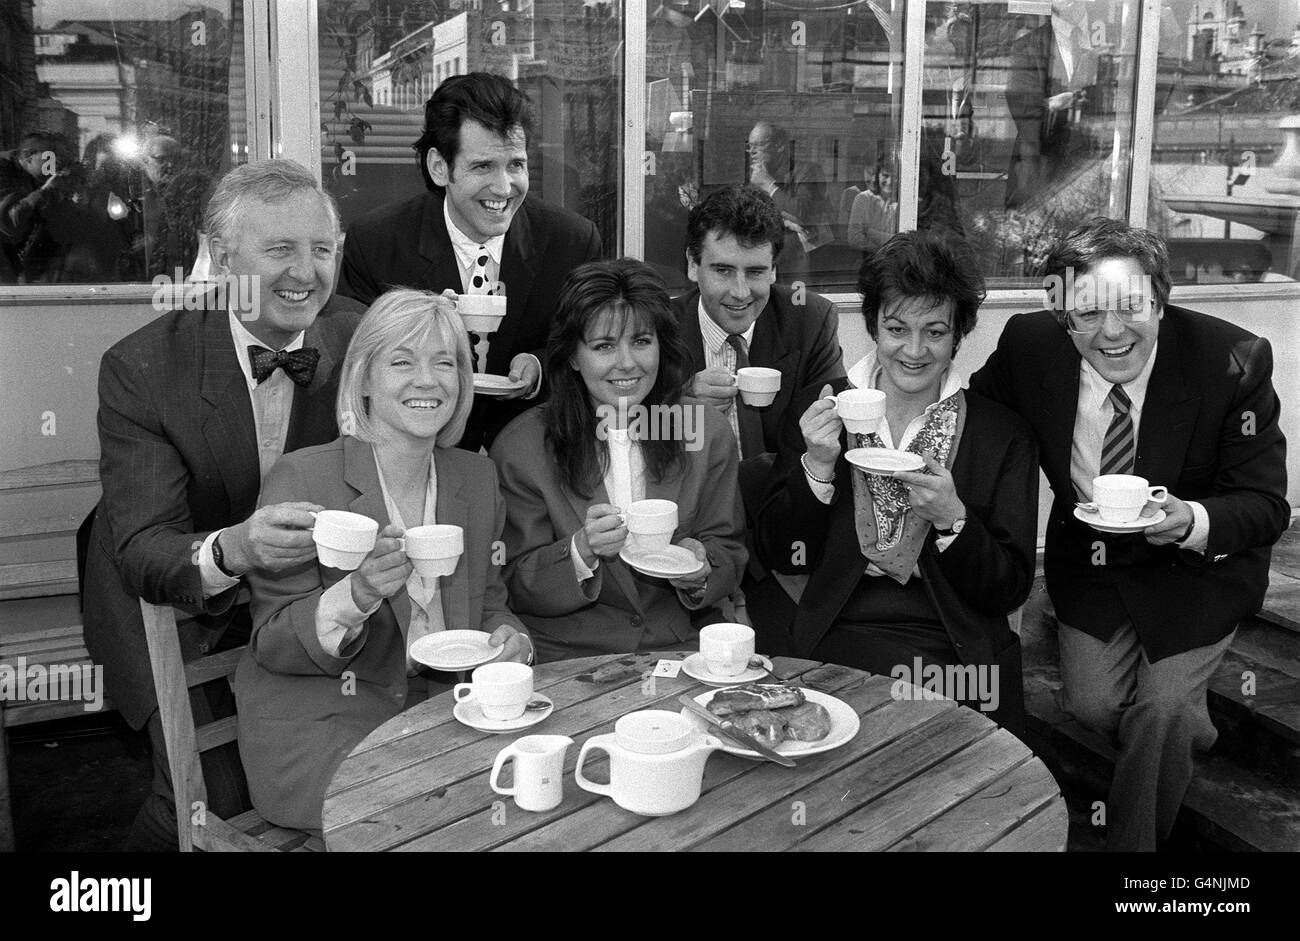 Channel 4 breakfast television presenters enjoy a cup of tea in London's Covent Garden. From left to right: Michael Nicholson, Carol Barnes, Garry Rice, Debbie Greenwood, Dermot Murnaghan, Susannah Simons and Richard Whiteley Stock Photo